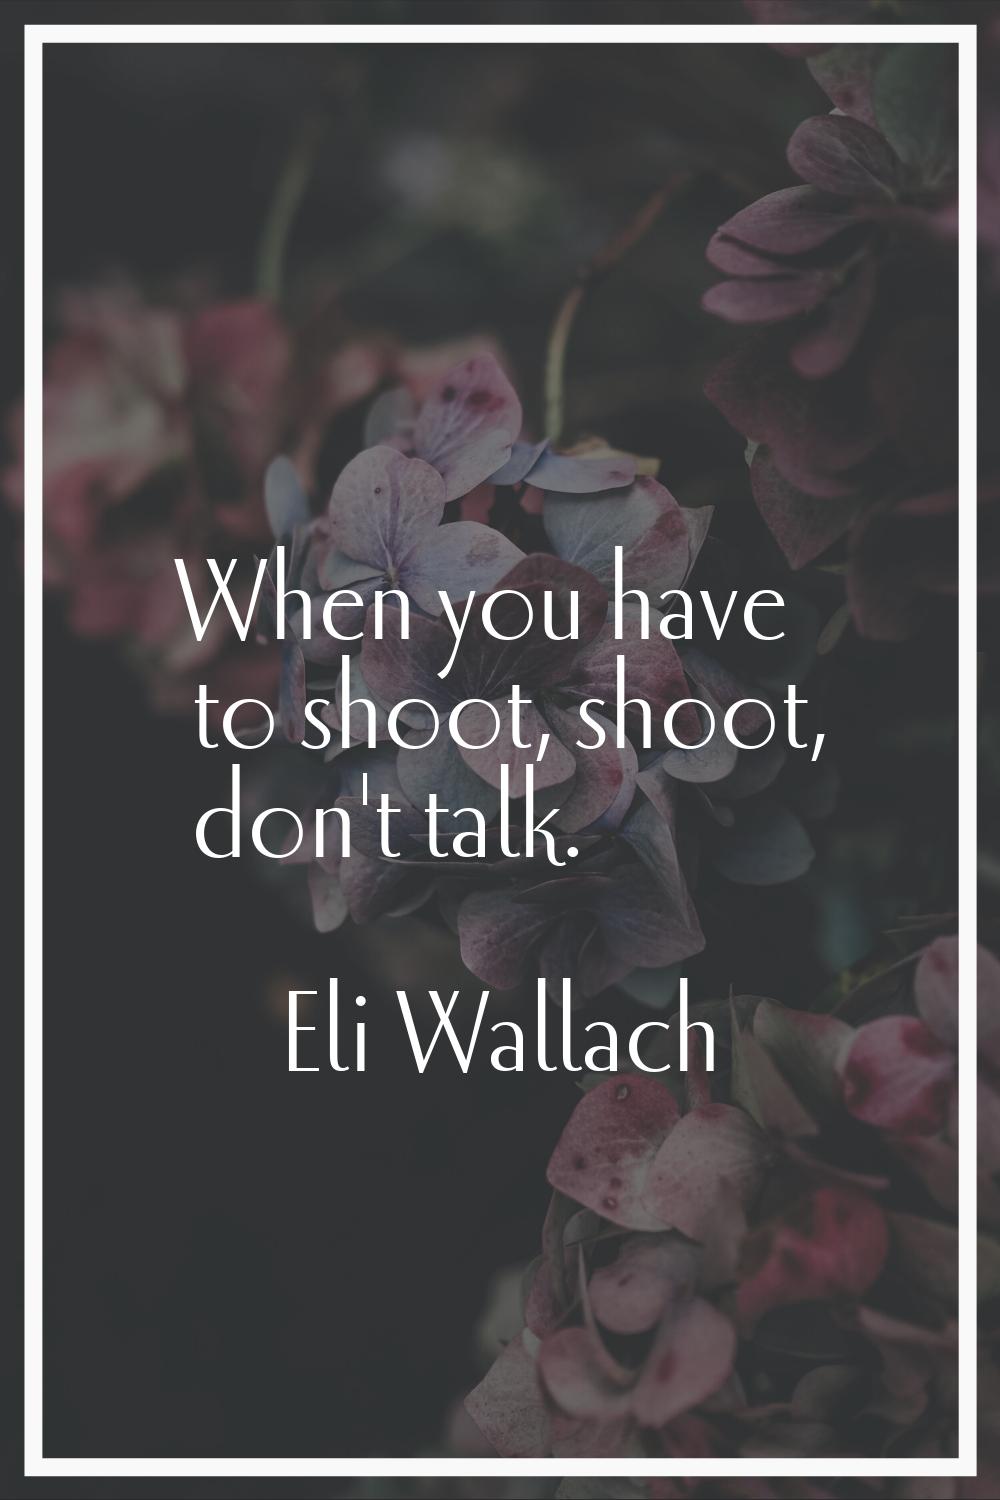 When you have to shoot, shoot, don't talk.